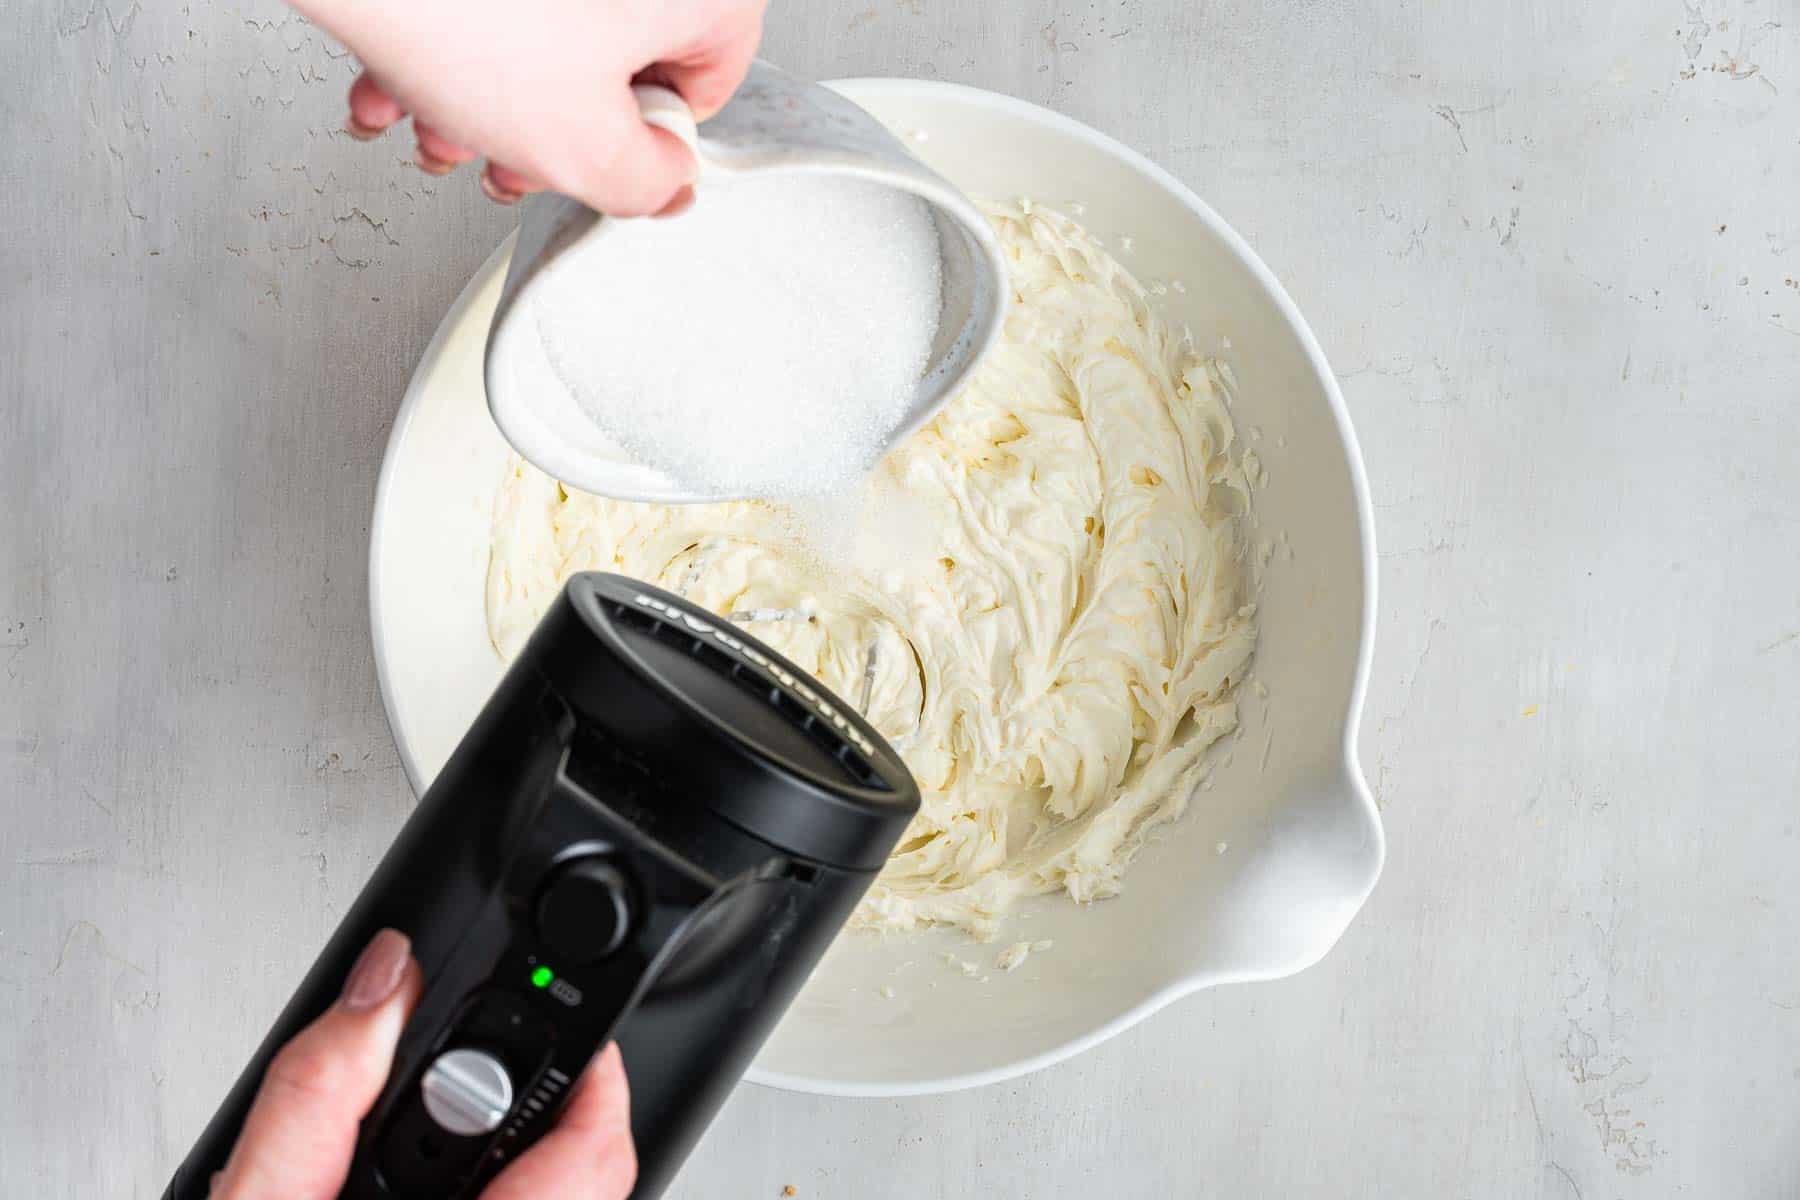 Bowl of white batter with sugar being poured in while mixing with electric mixer.